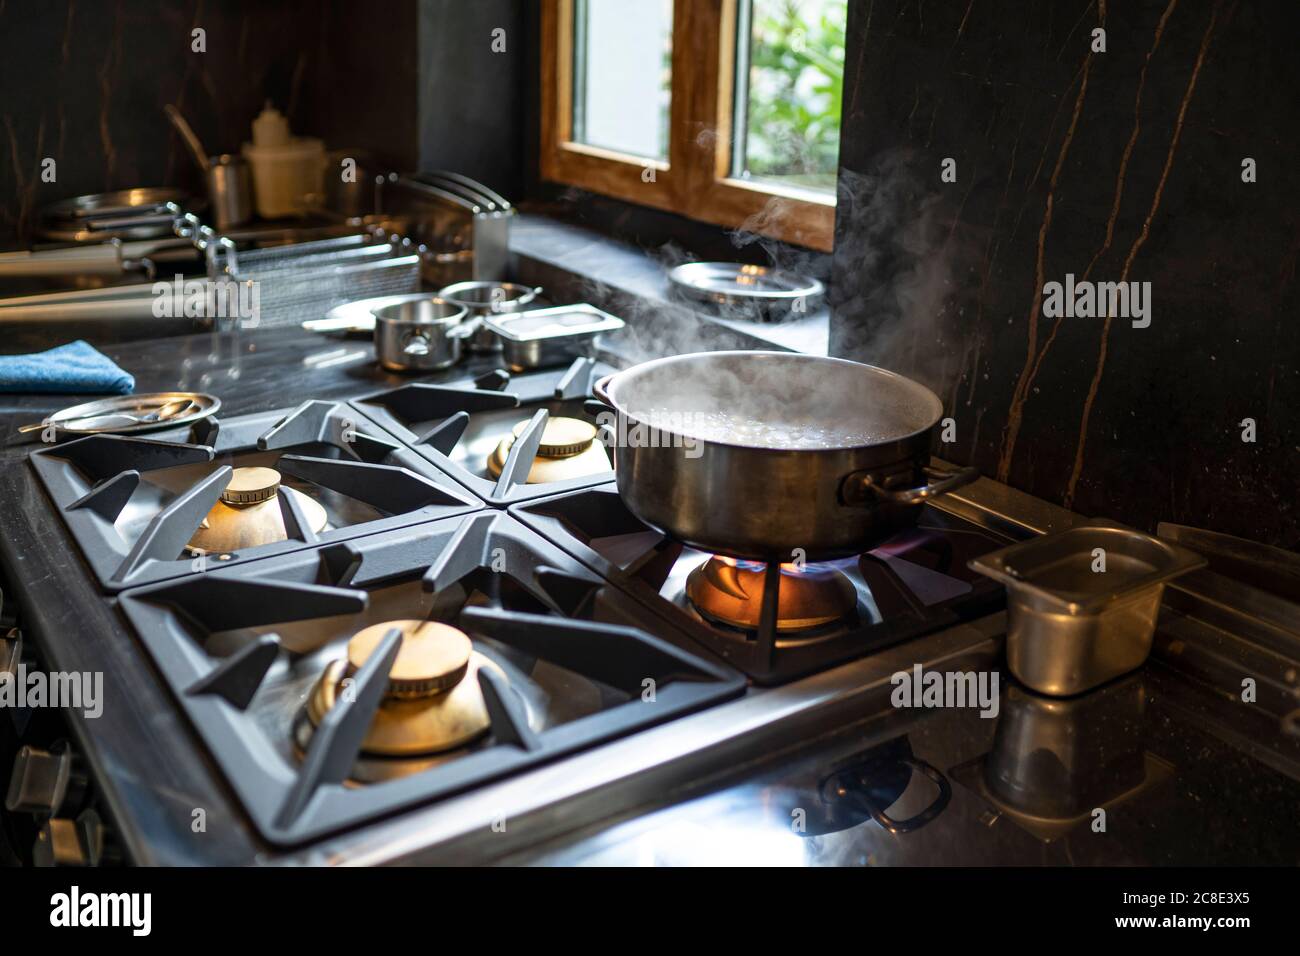 Cooking pot on gas stove in restaurant kitchen Stock Photo